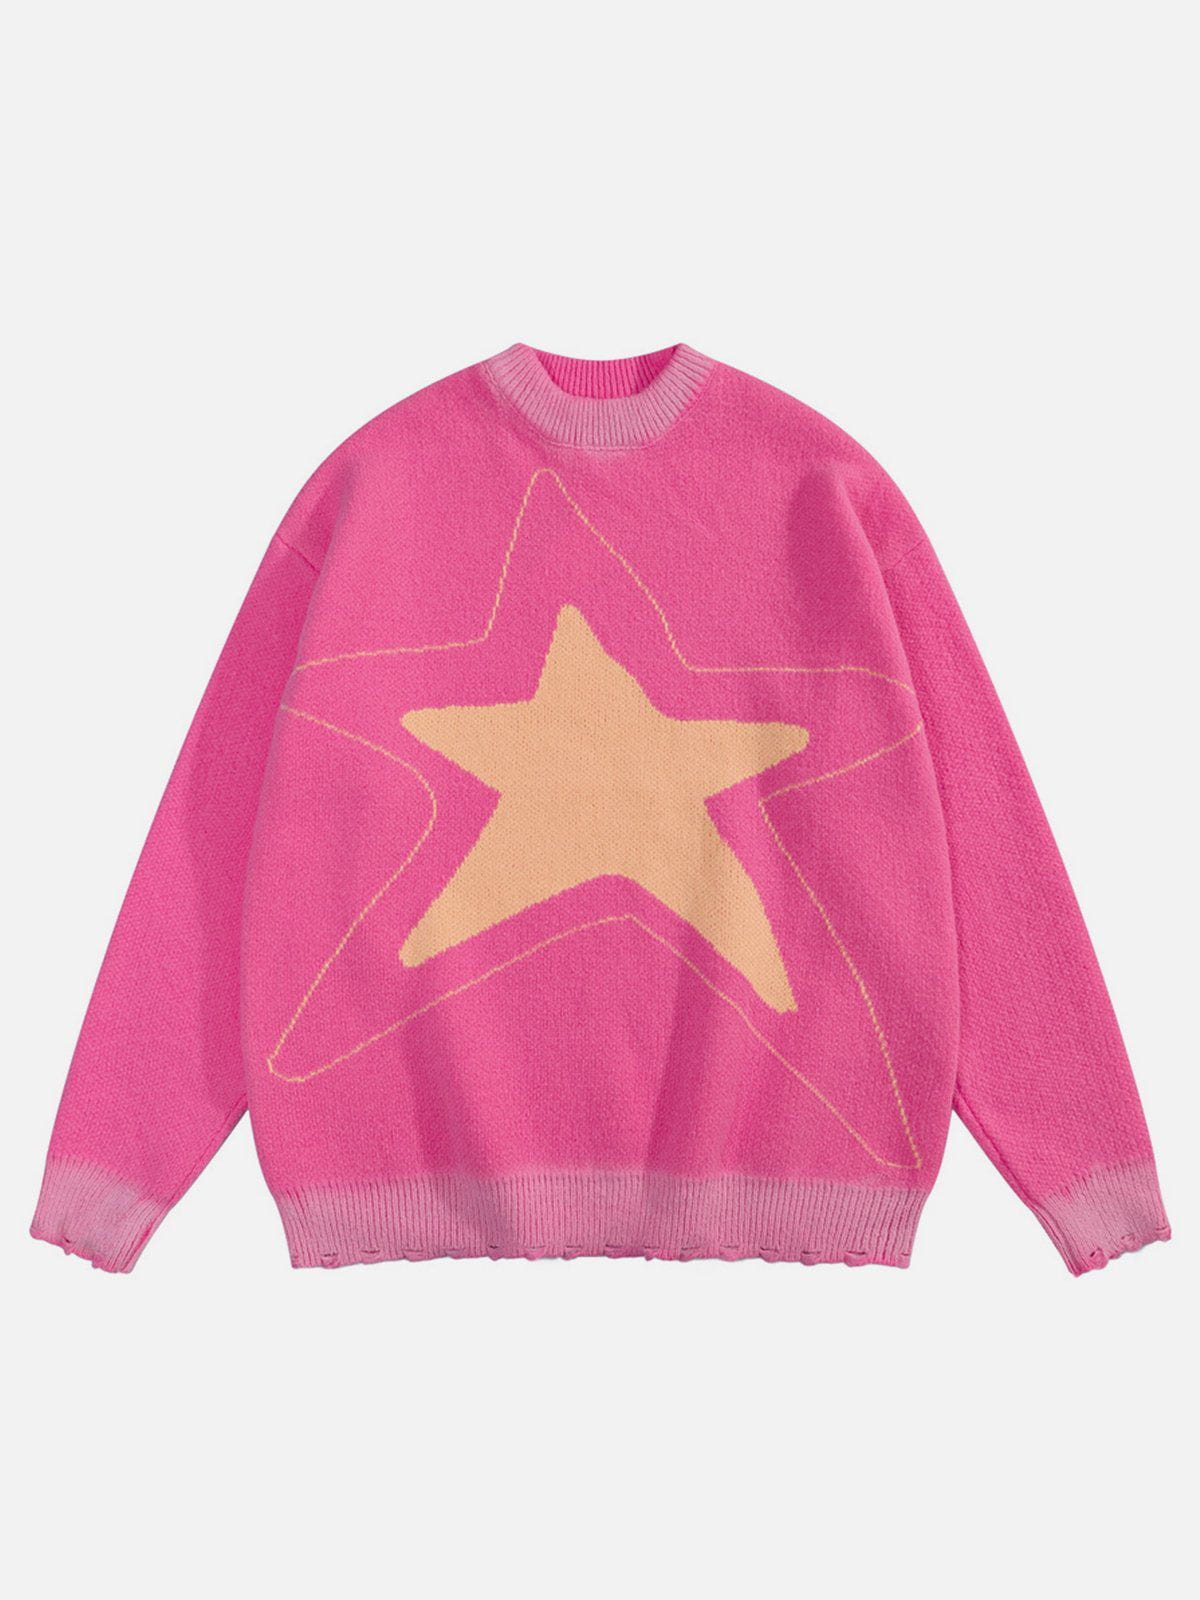 Shining Star Patchwork Sweater